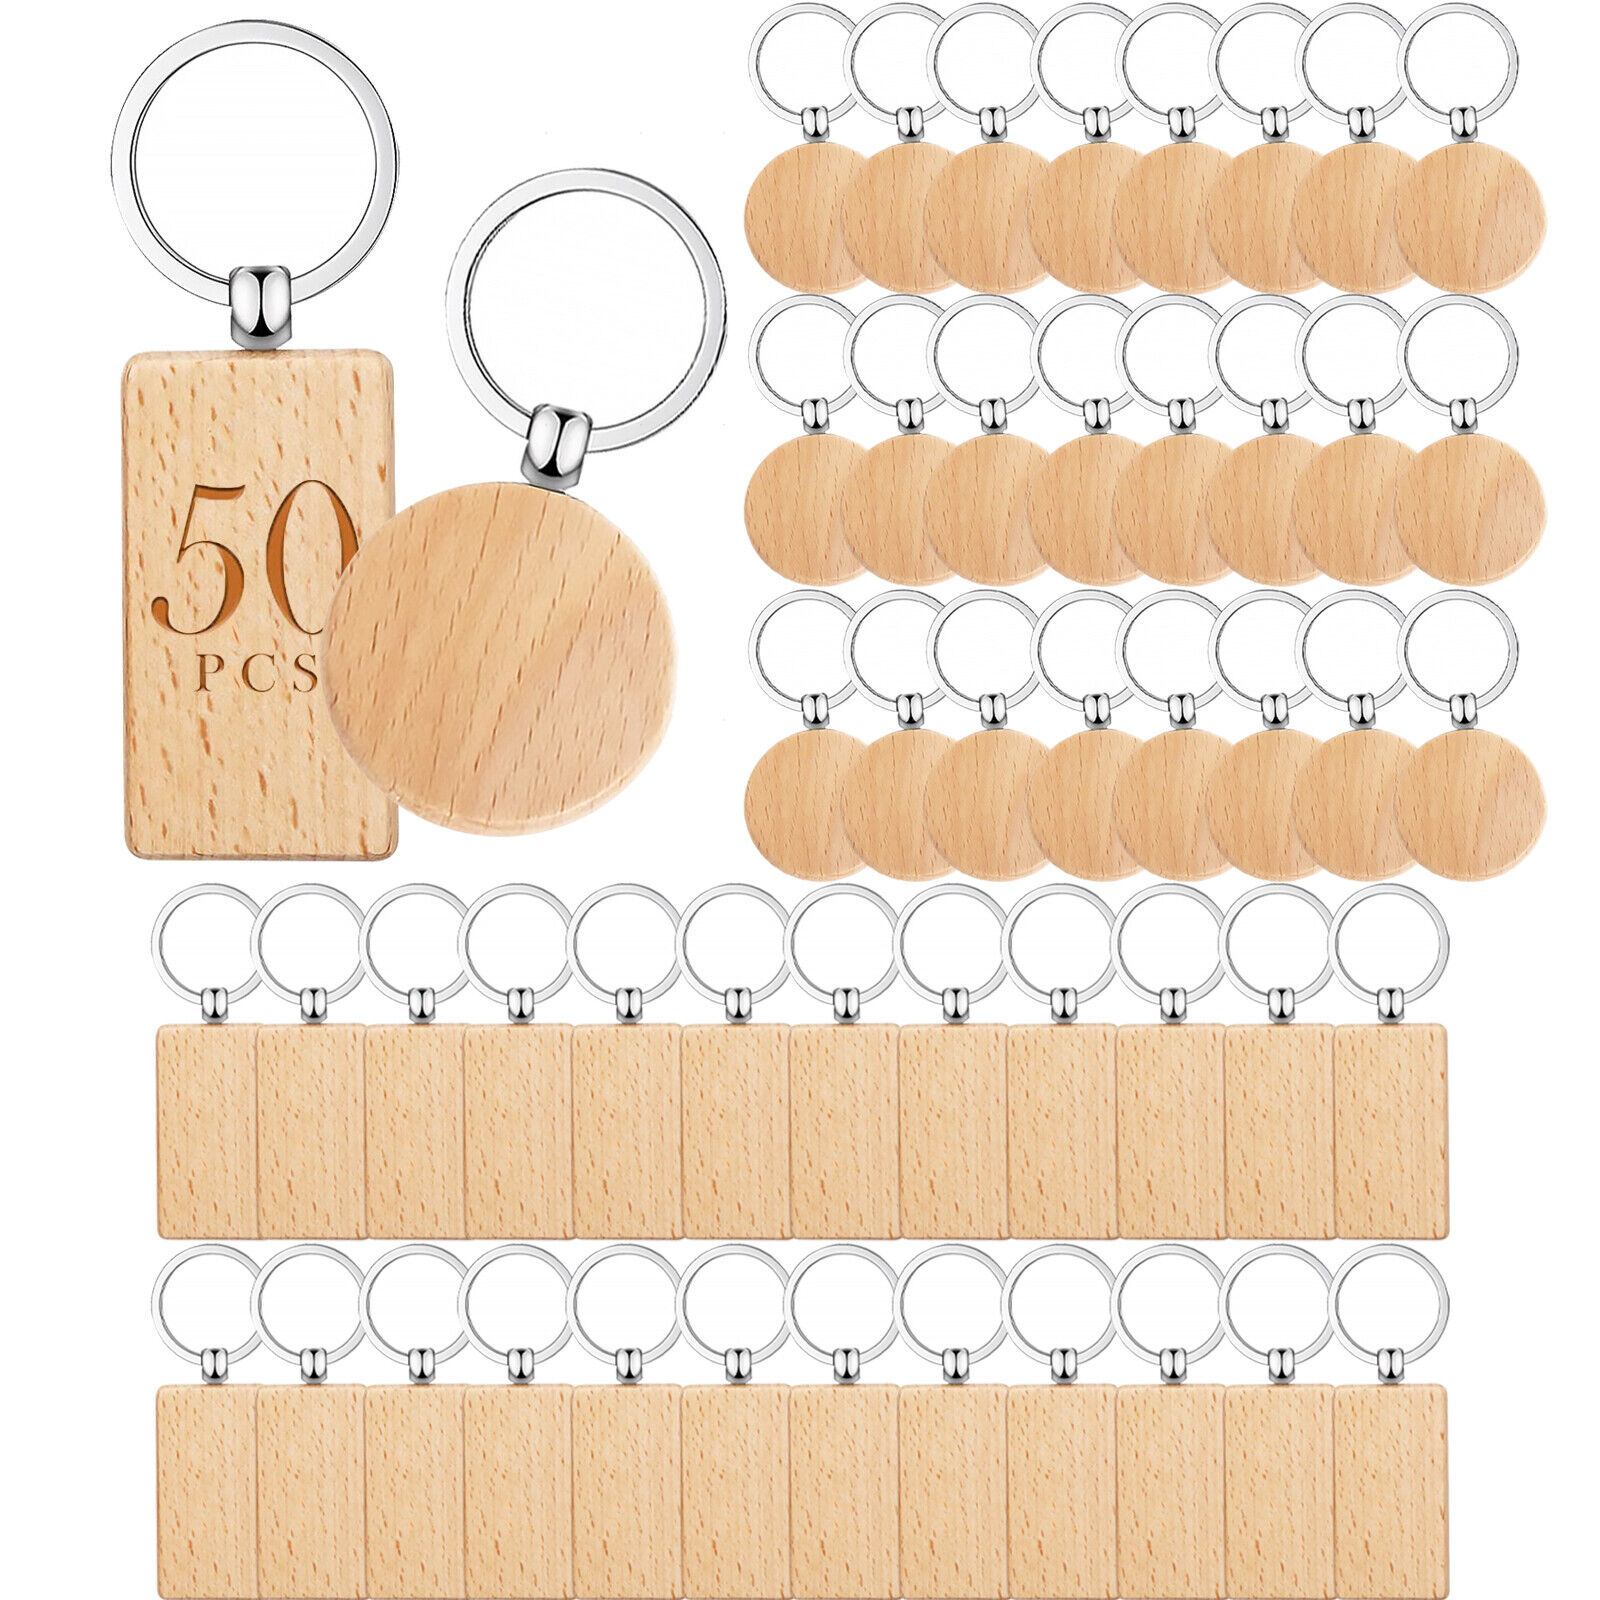 50 Pcs Blank Keychains Blanks Personalized Wooden Tags Can Be Keychains, Tags 